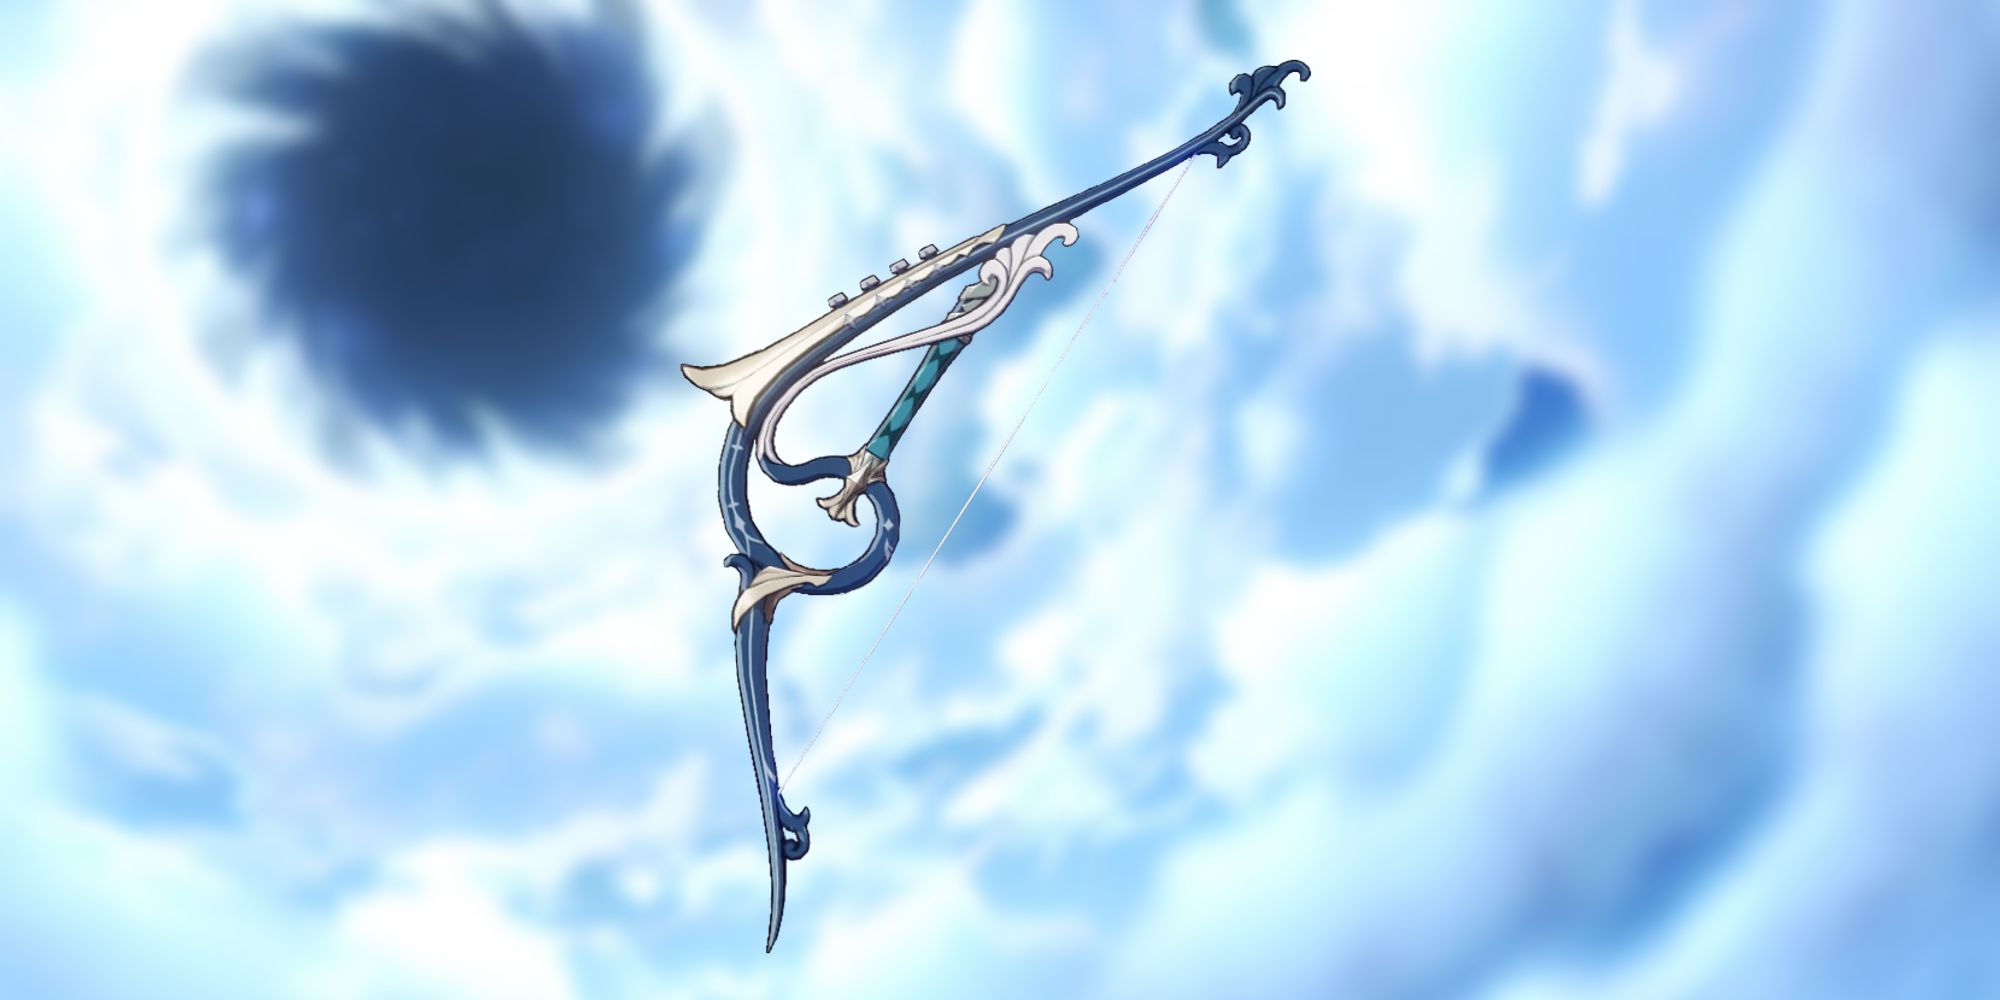 The stringless bow on wish background